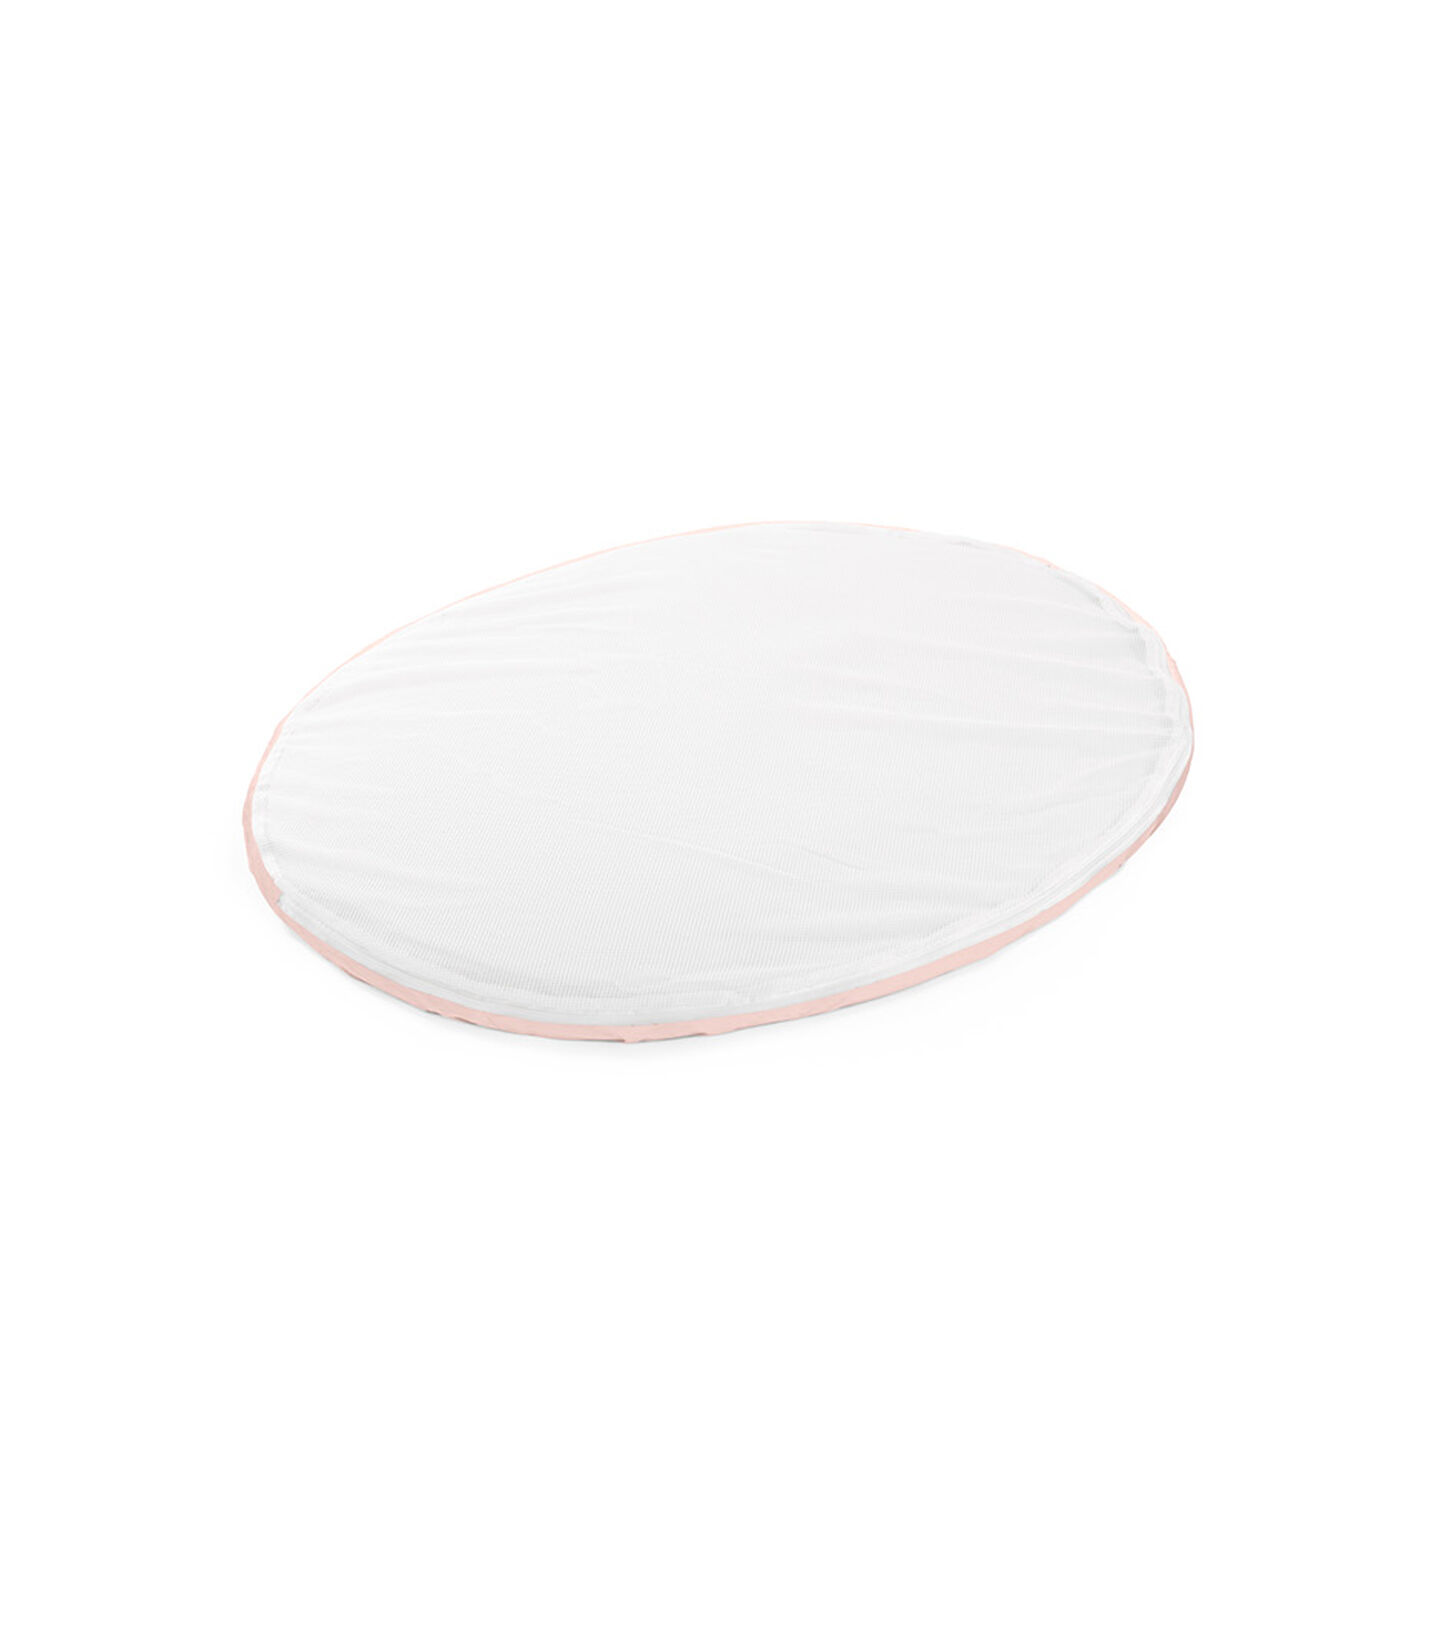 Stokke® Sleepi™ Mini Fitted Sheet Peachy Pink, Peachy Pink, mainview view 2